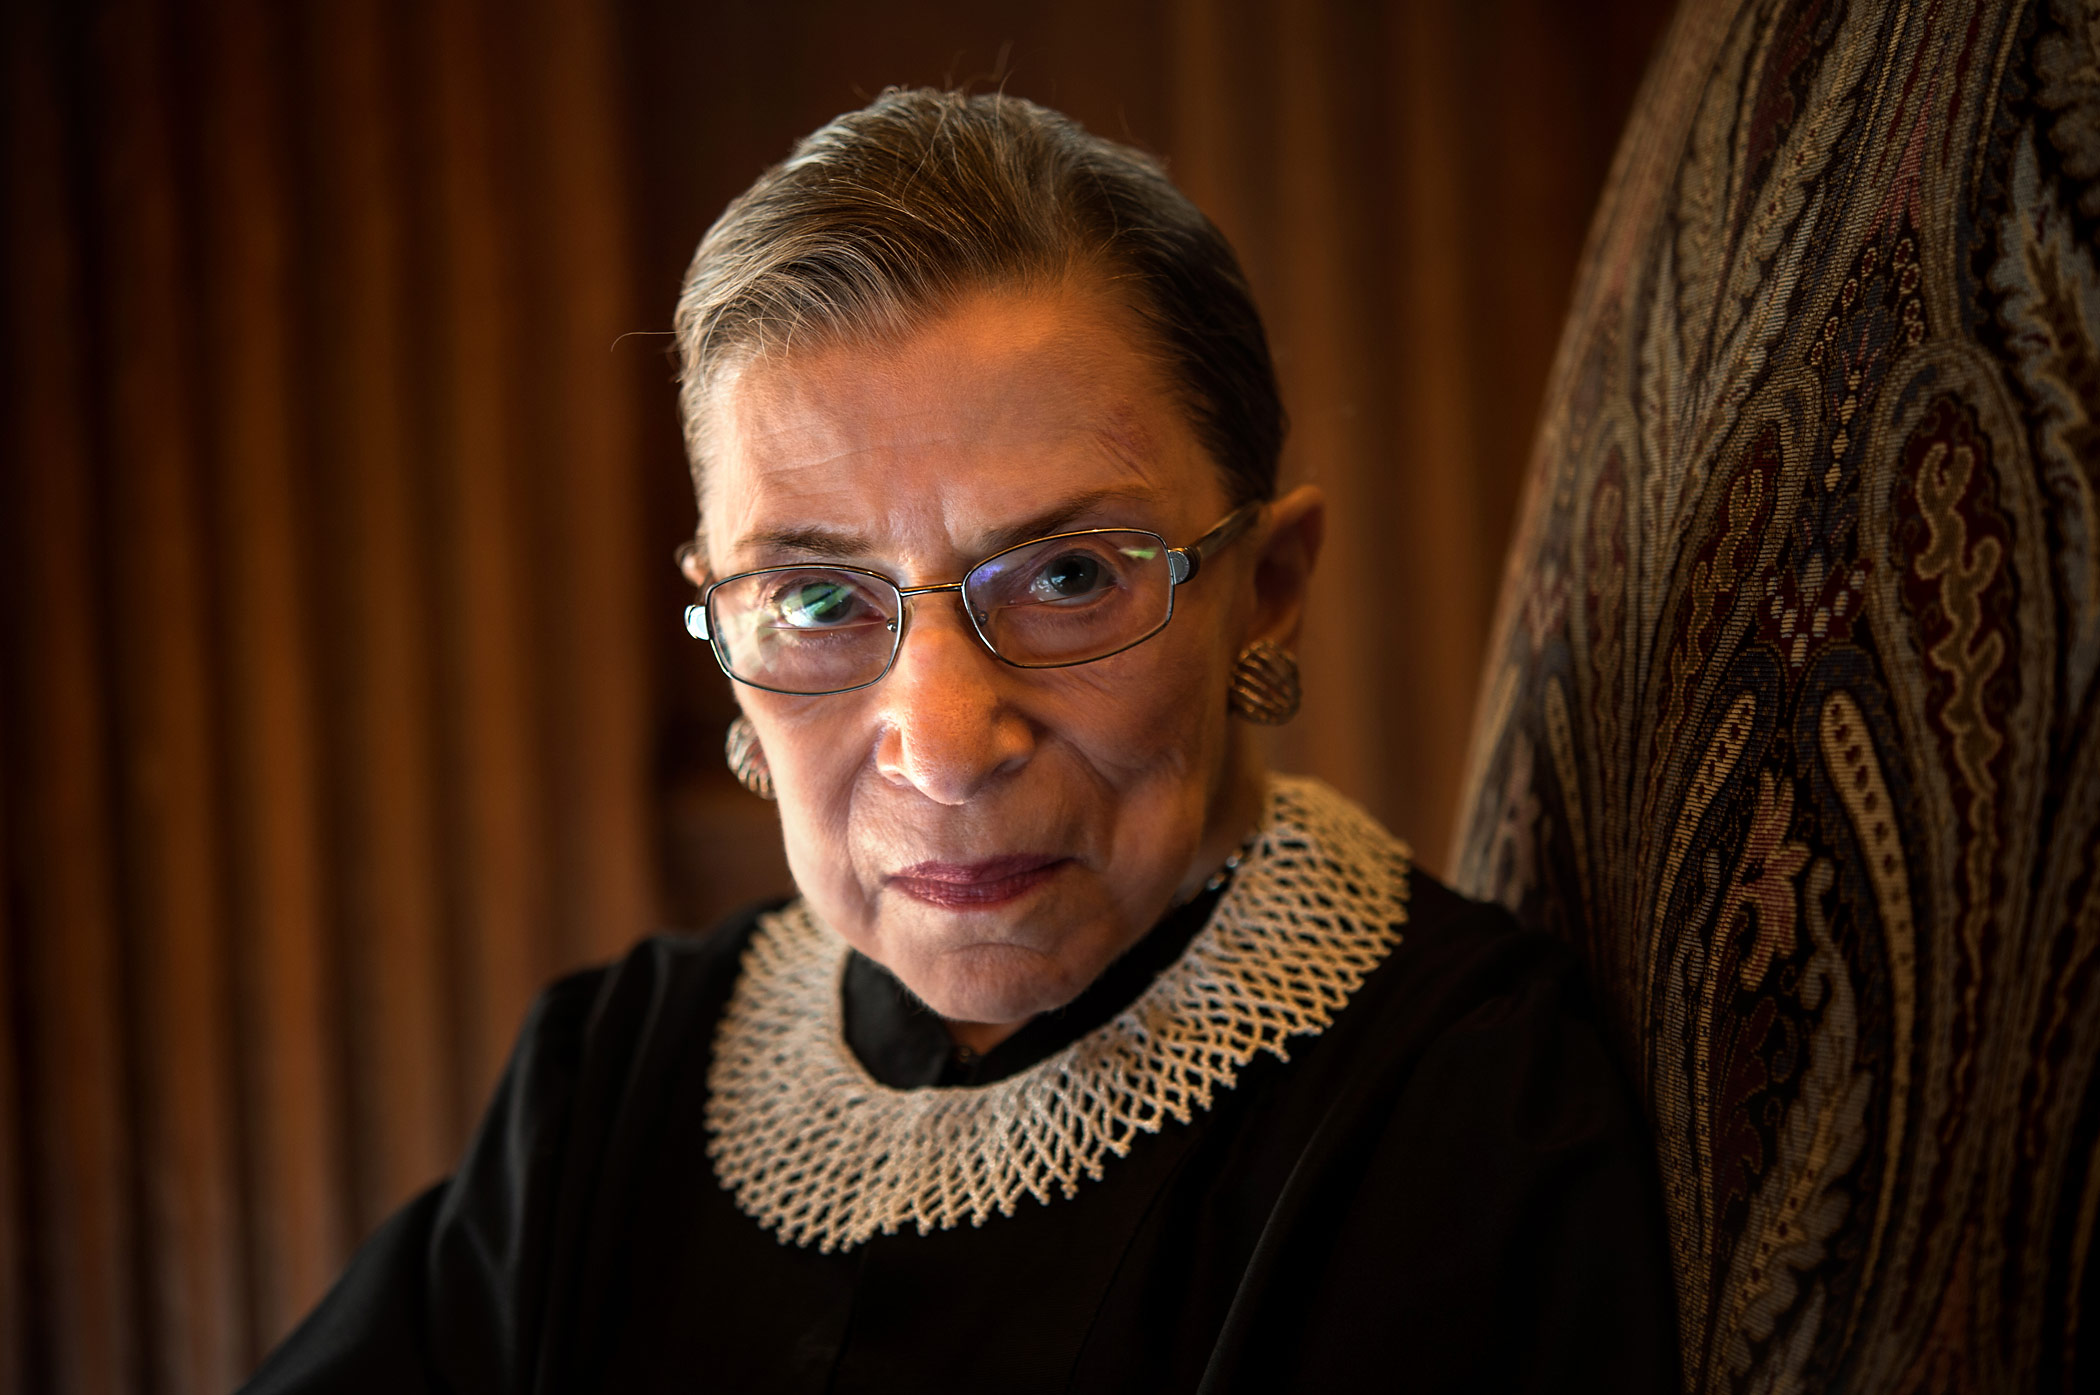 Supreme Court Justice Ruth Bader Ginsburg is photographed in the West conference room at the U.S. Supreme Court in Washington, D.C., on August 30, 2013. (Nikki Kahn—The Washington Post/Getty Images)